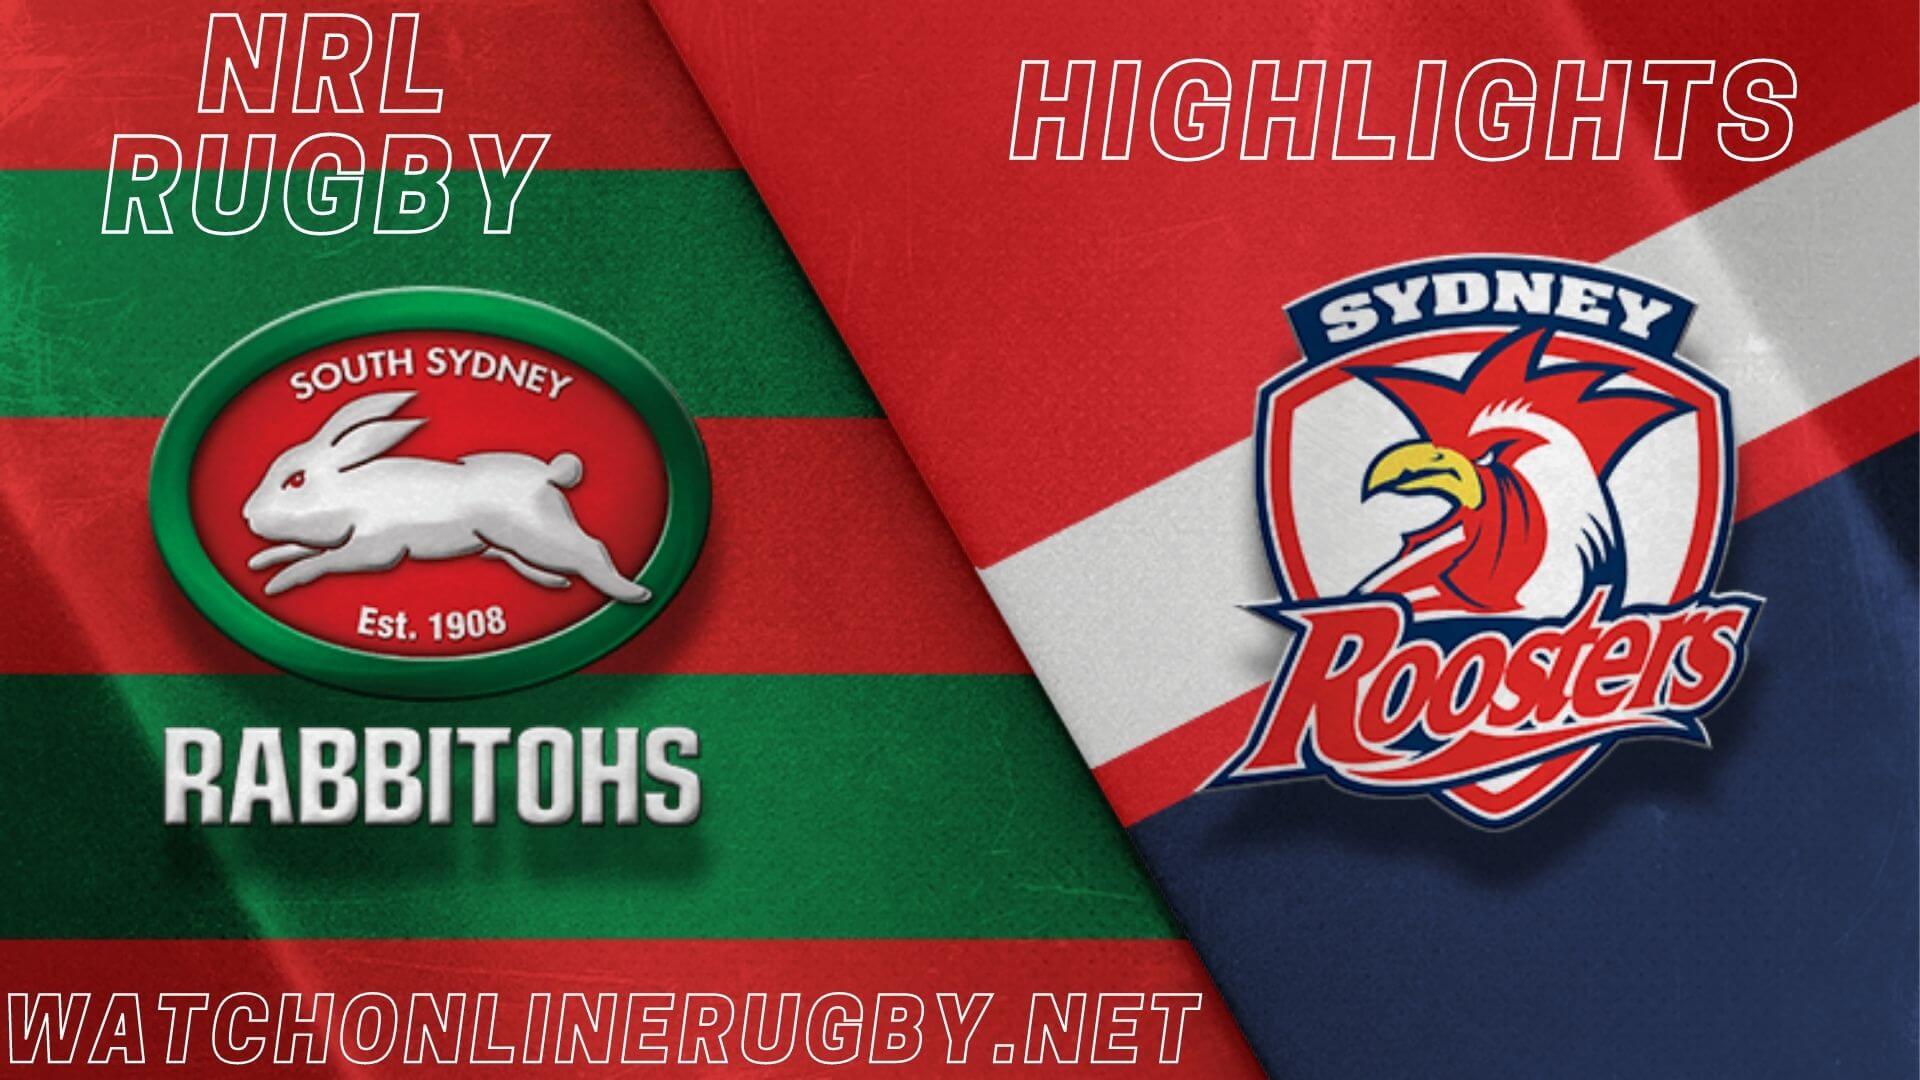 Roosters Vs Rabbitohs Highlights RD 25 NRL Rugby